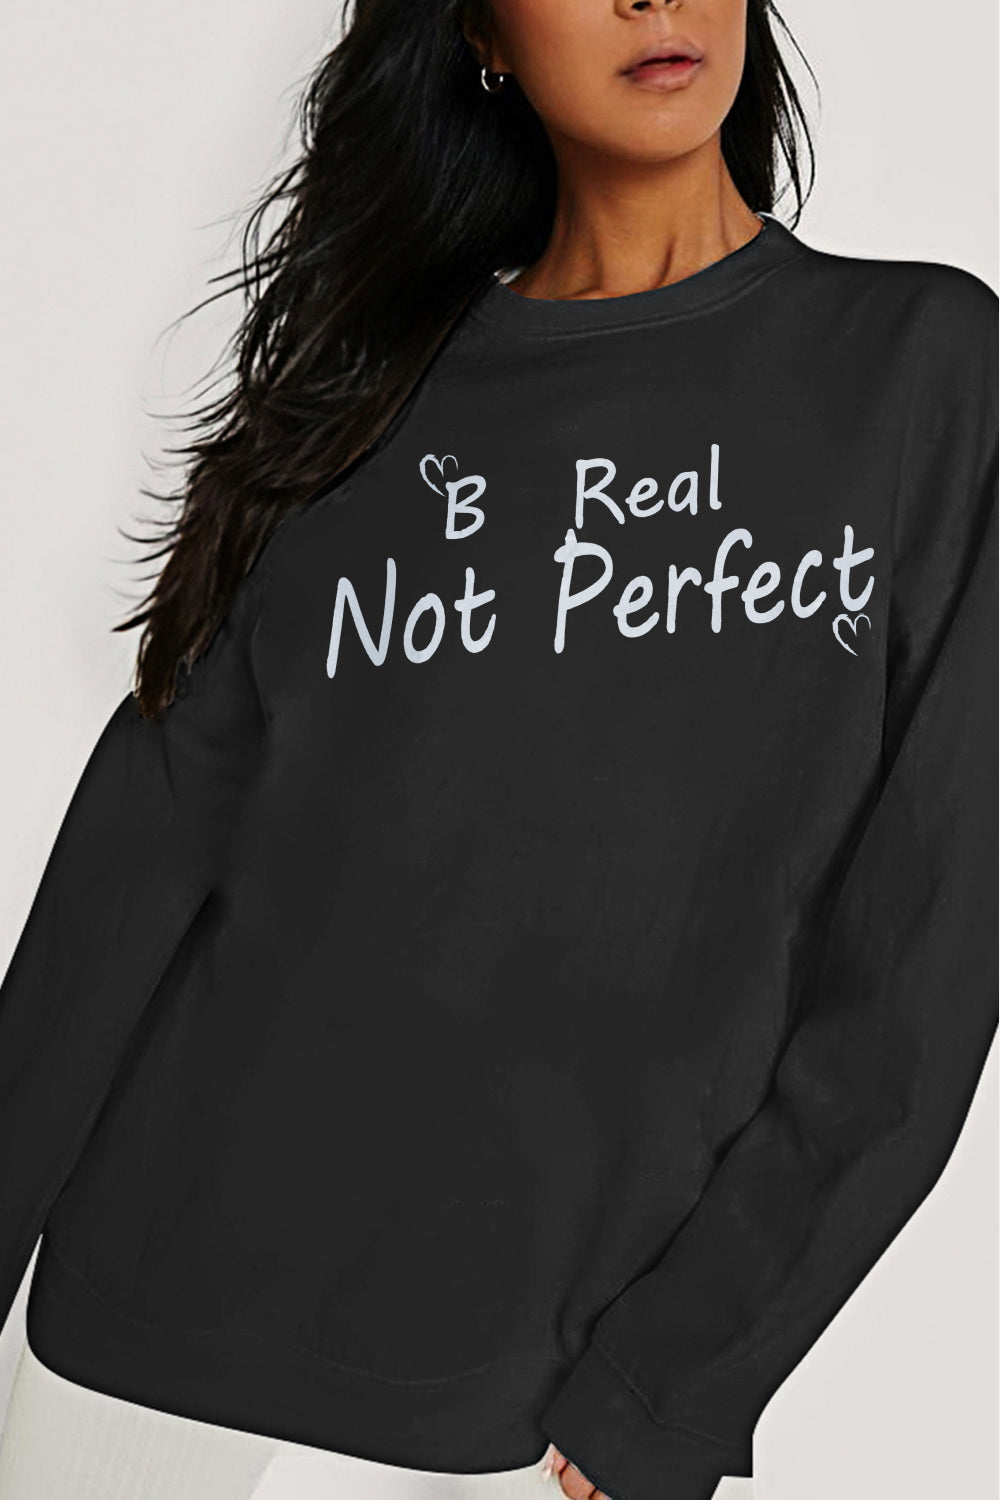 BE REAL NOT PERFECT Graphic Sweatshirt - Kawaii Stop - Authenticity, Casual Style, Cozy Comfort, Dropped Shoulders, Embrace Imperfections, Everyday Fashion, Express Your Message, Graphic Sweatshirt, Hoodies, Long Length, Ship From Overseas, Shipping Delay 09/29/2023 - 10/04/2023, Simply Love, Softness and Slight Stretch, Sweatshirts, Women's Apparel, Women's Clothing, Women's Clothing &amp; Accessories